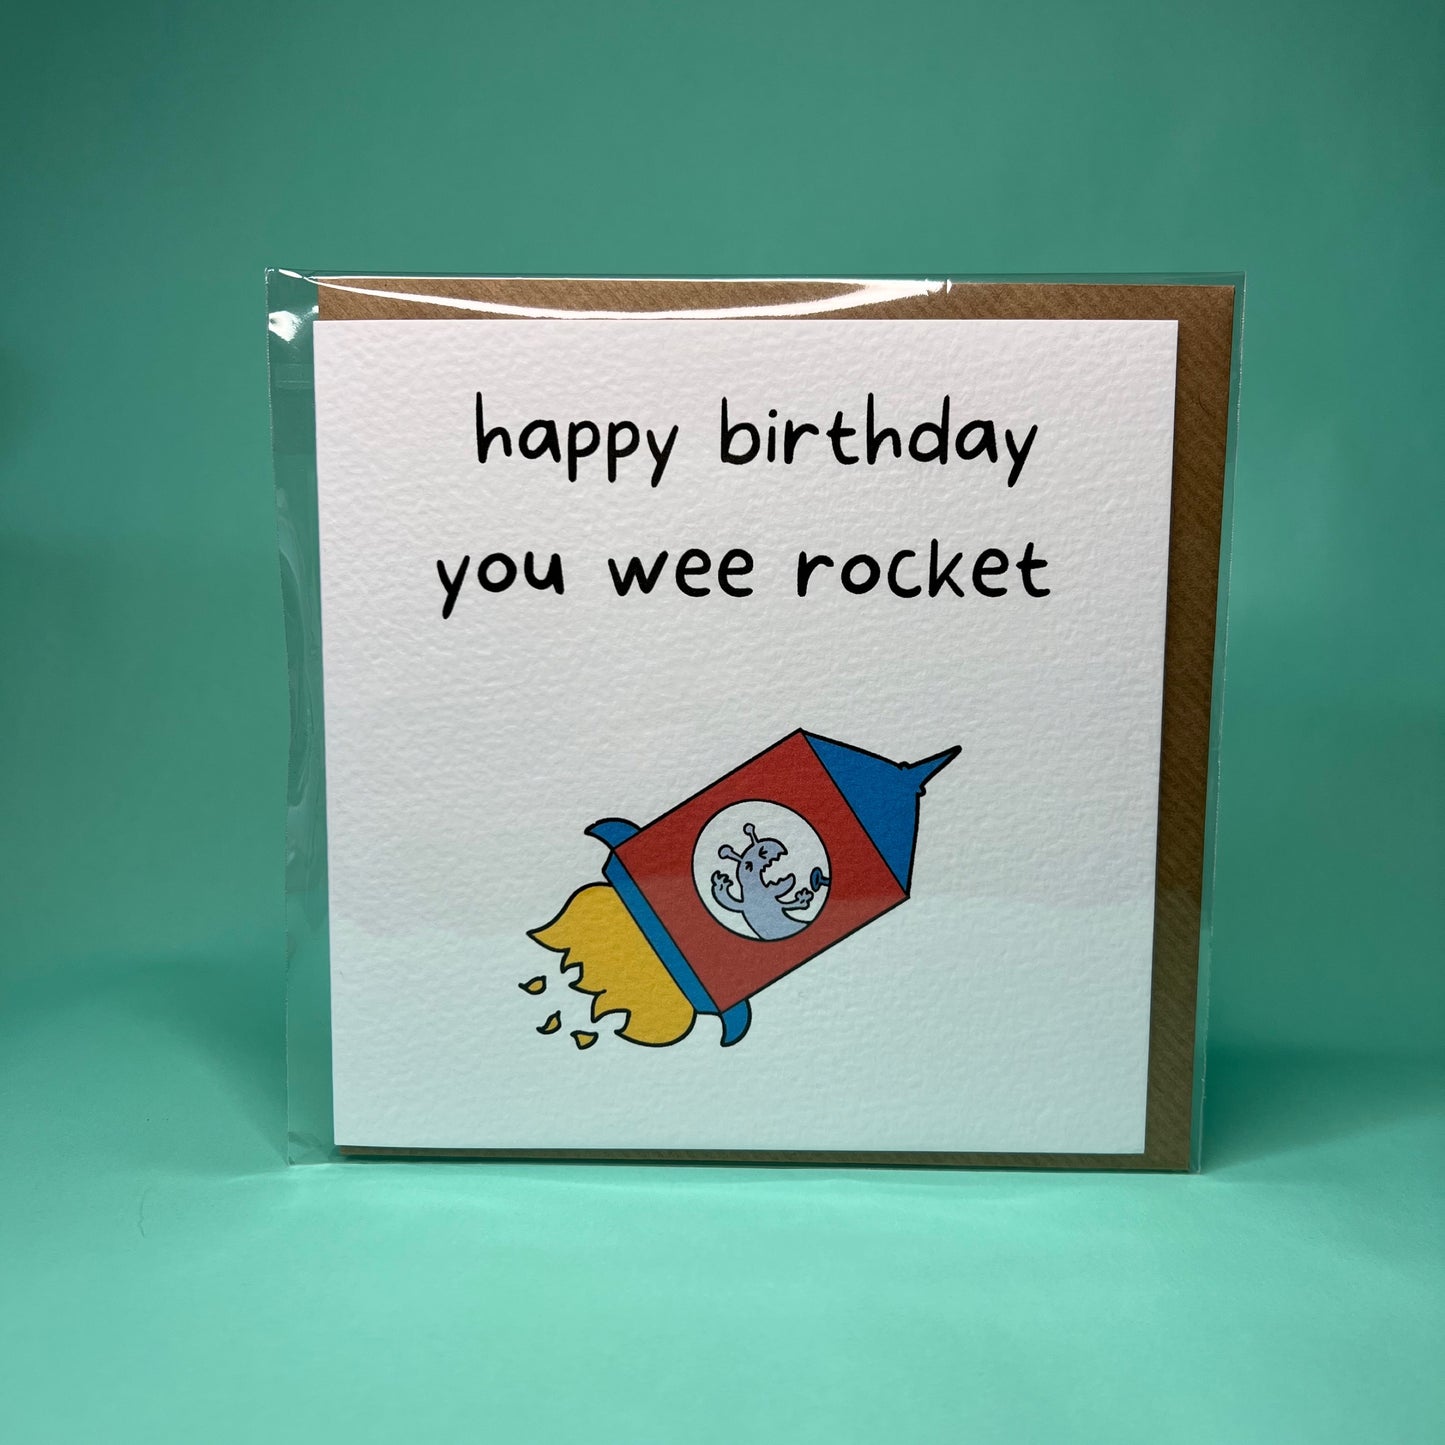 Happy Birthday You Wee Rocket. By Leopard Print Cards